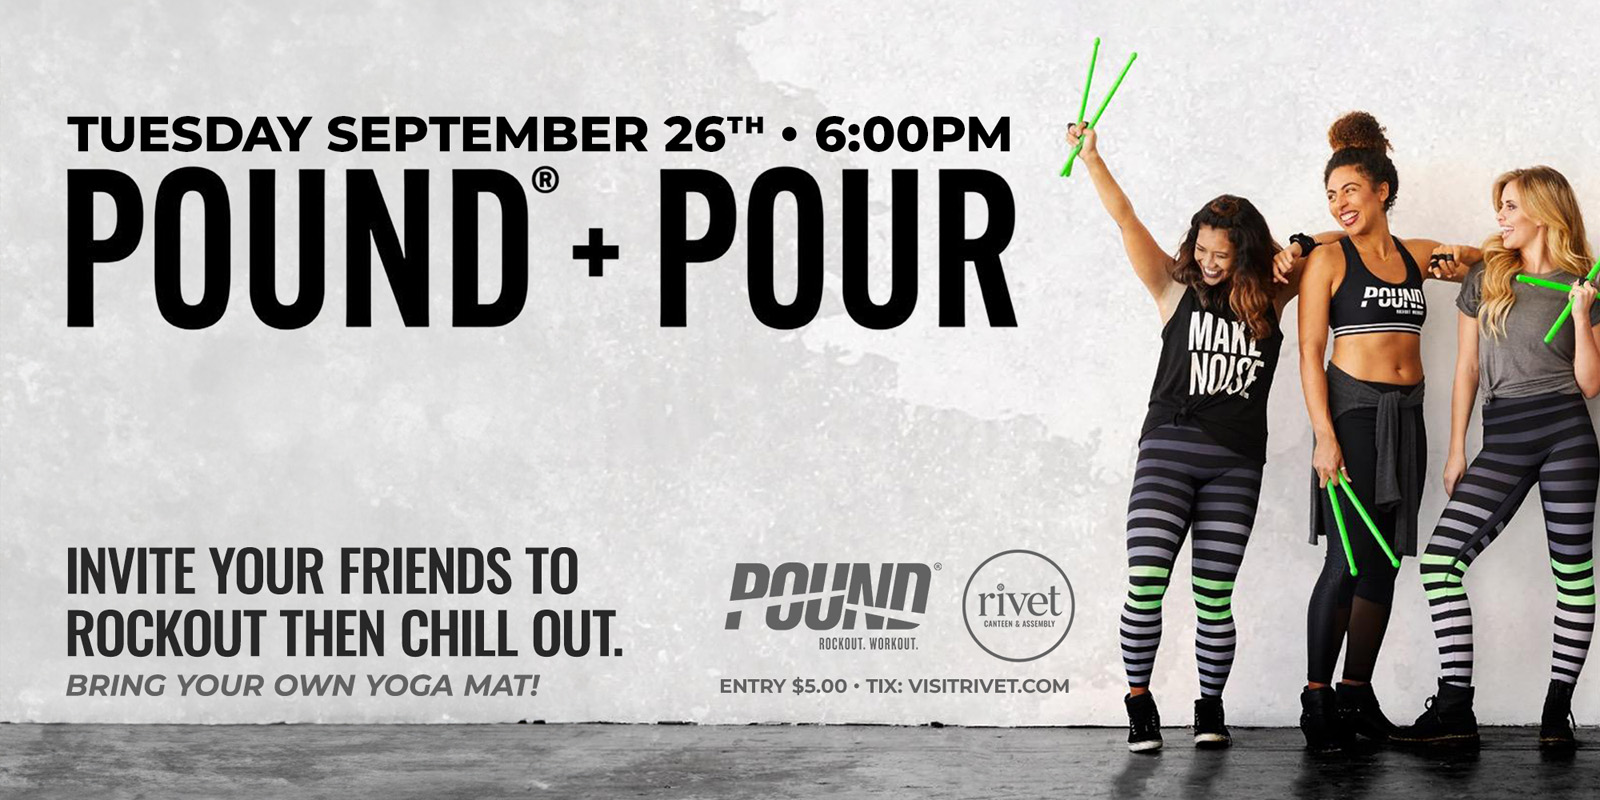 Pound and Pour class at Rivet: Canteen & Assembly on Tuesday, September 26th, with Penny from Crunch Fitness! Get ready to energize your body and mingle with like-minded fitness enthusiasts!